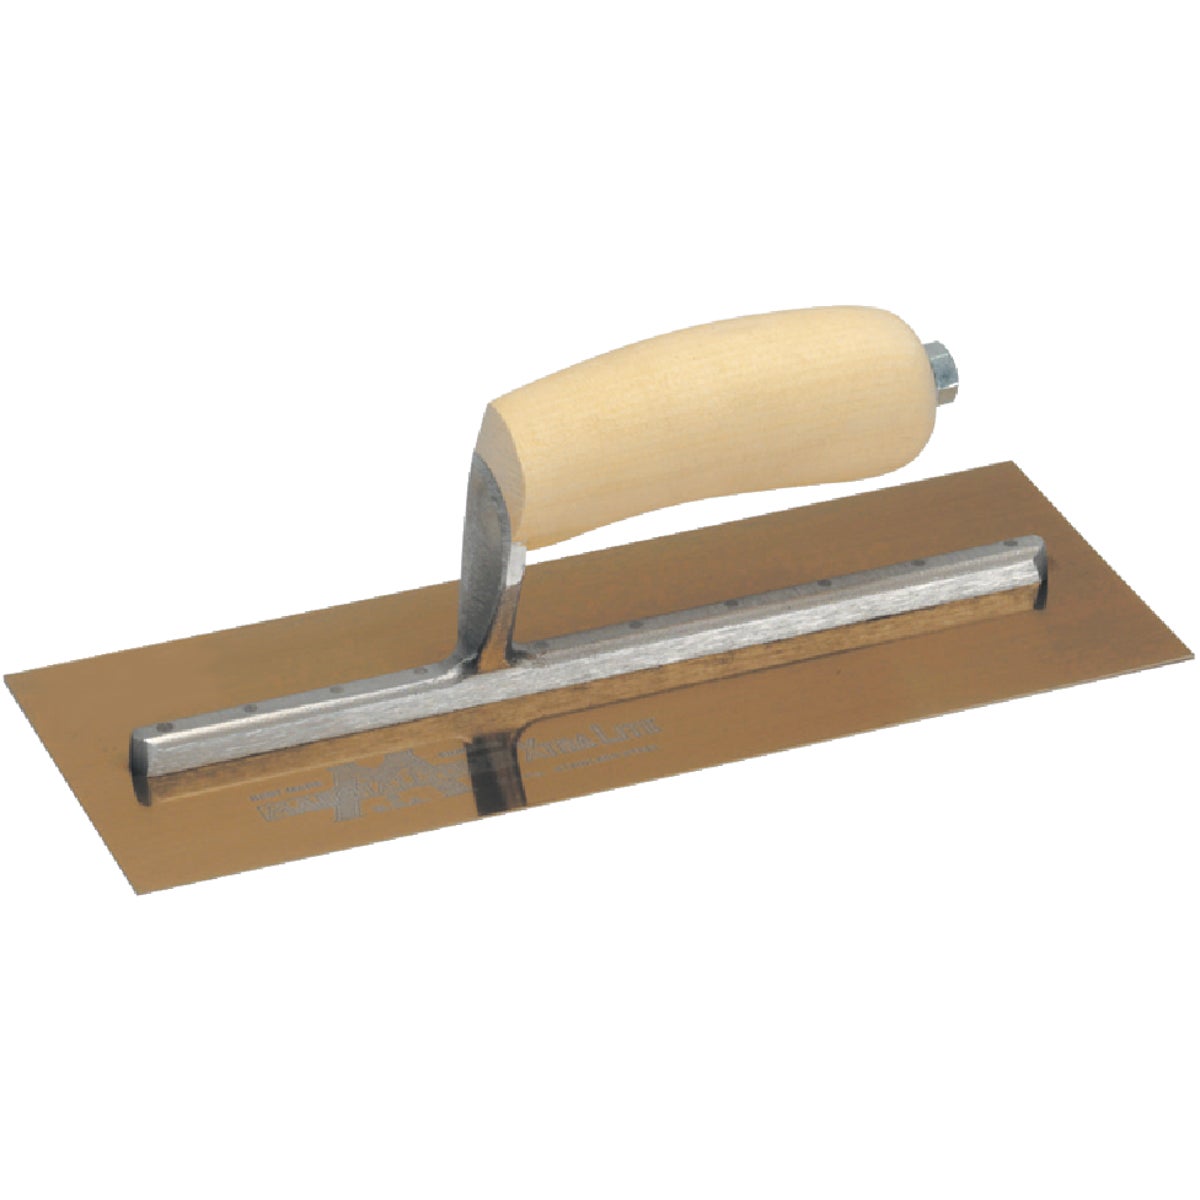 Marshalltown 4-1/2 In. x 11 In. Golden Stainless Steel Finishing Trowel with Curved Wood Handle